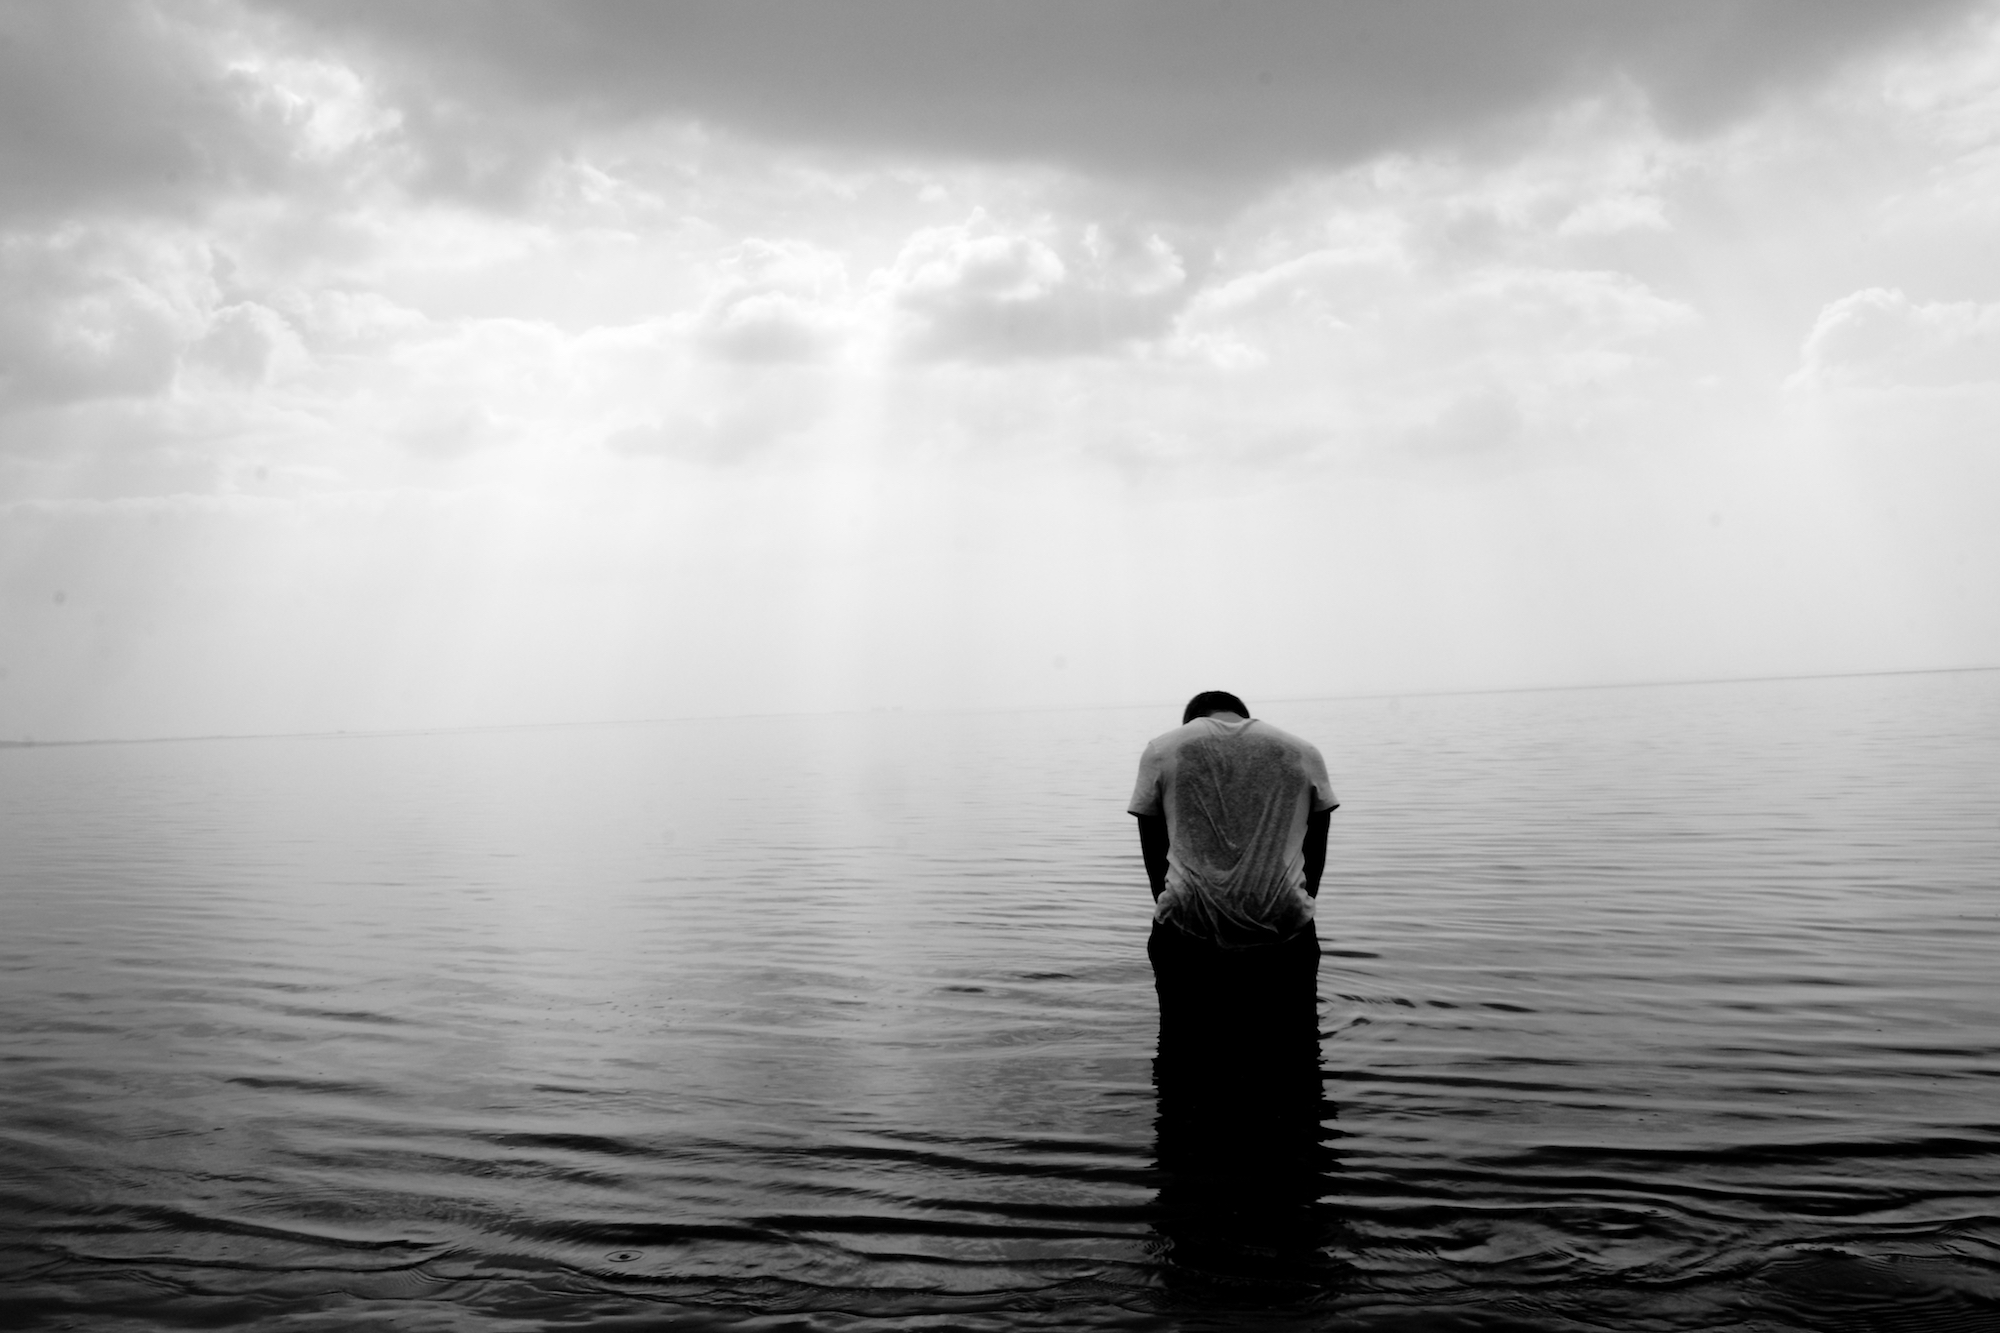 Man hunched over standing in a large body of water